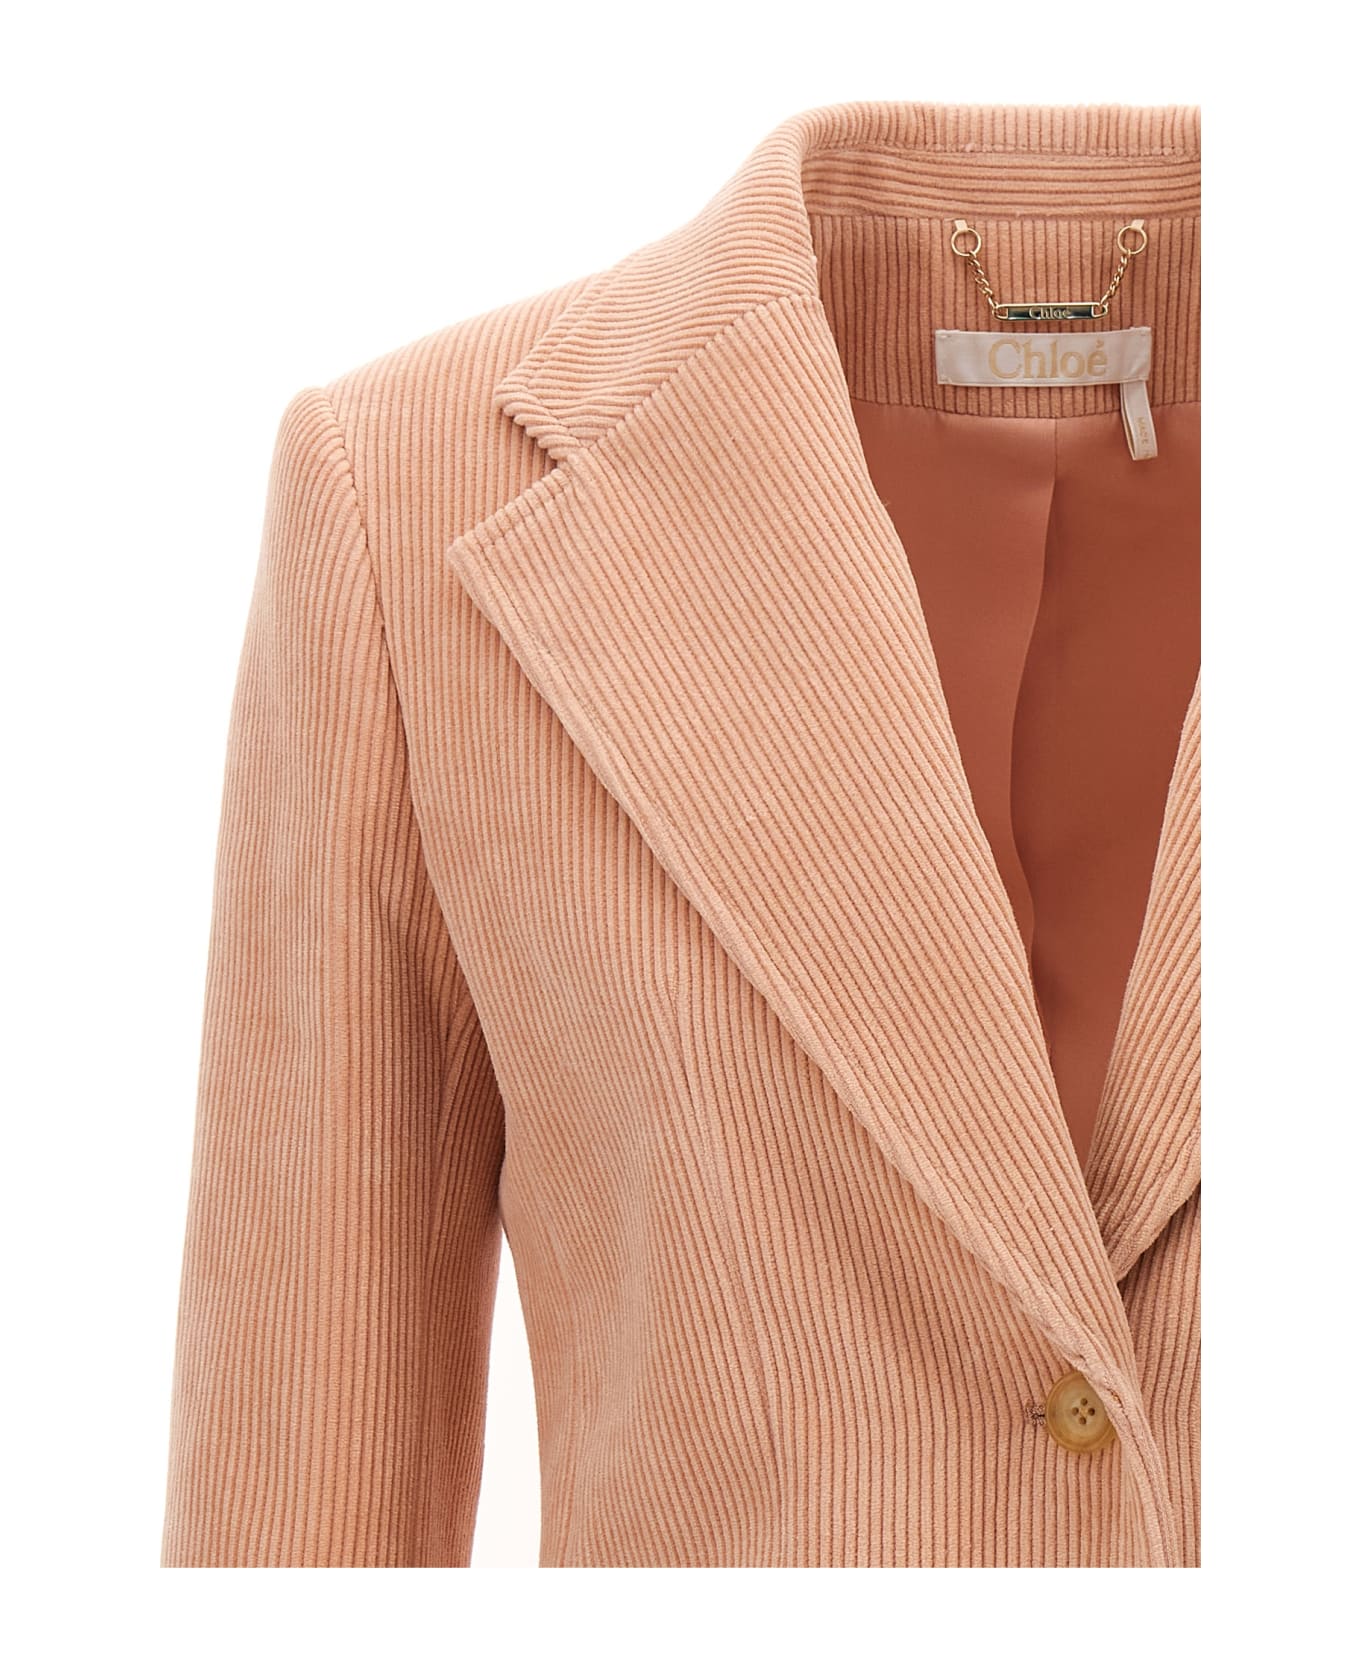 Chloé Single-breasted Cotton Jacket - MISTY PINK ブレザー